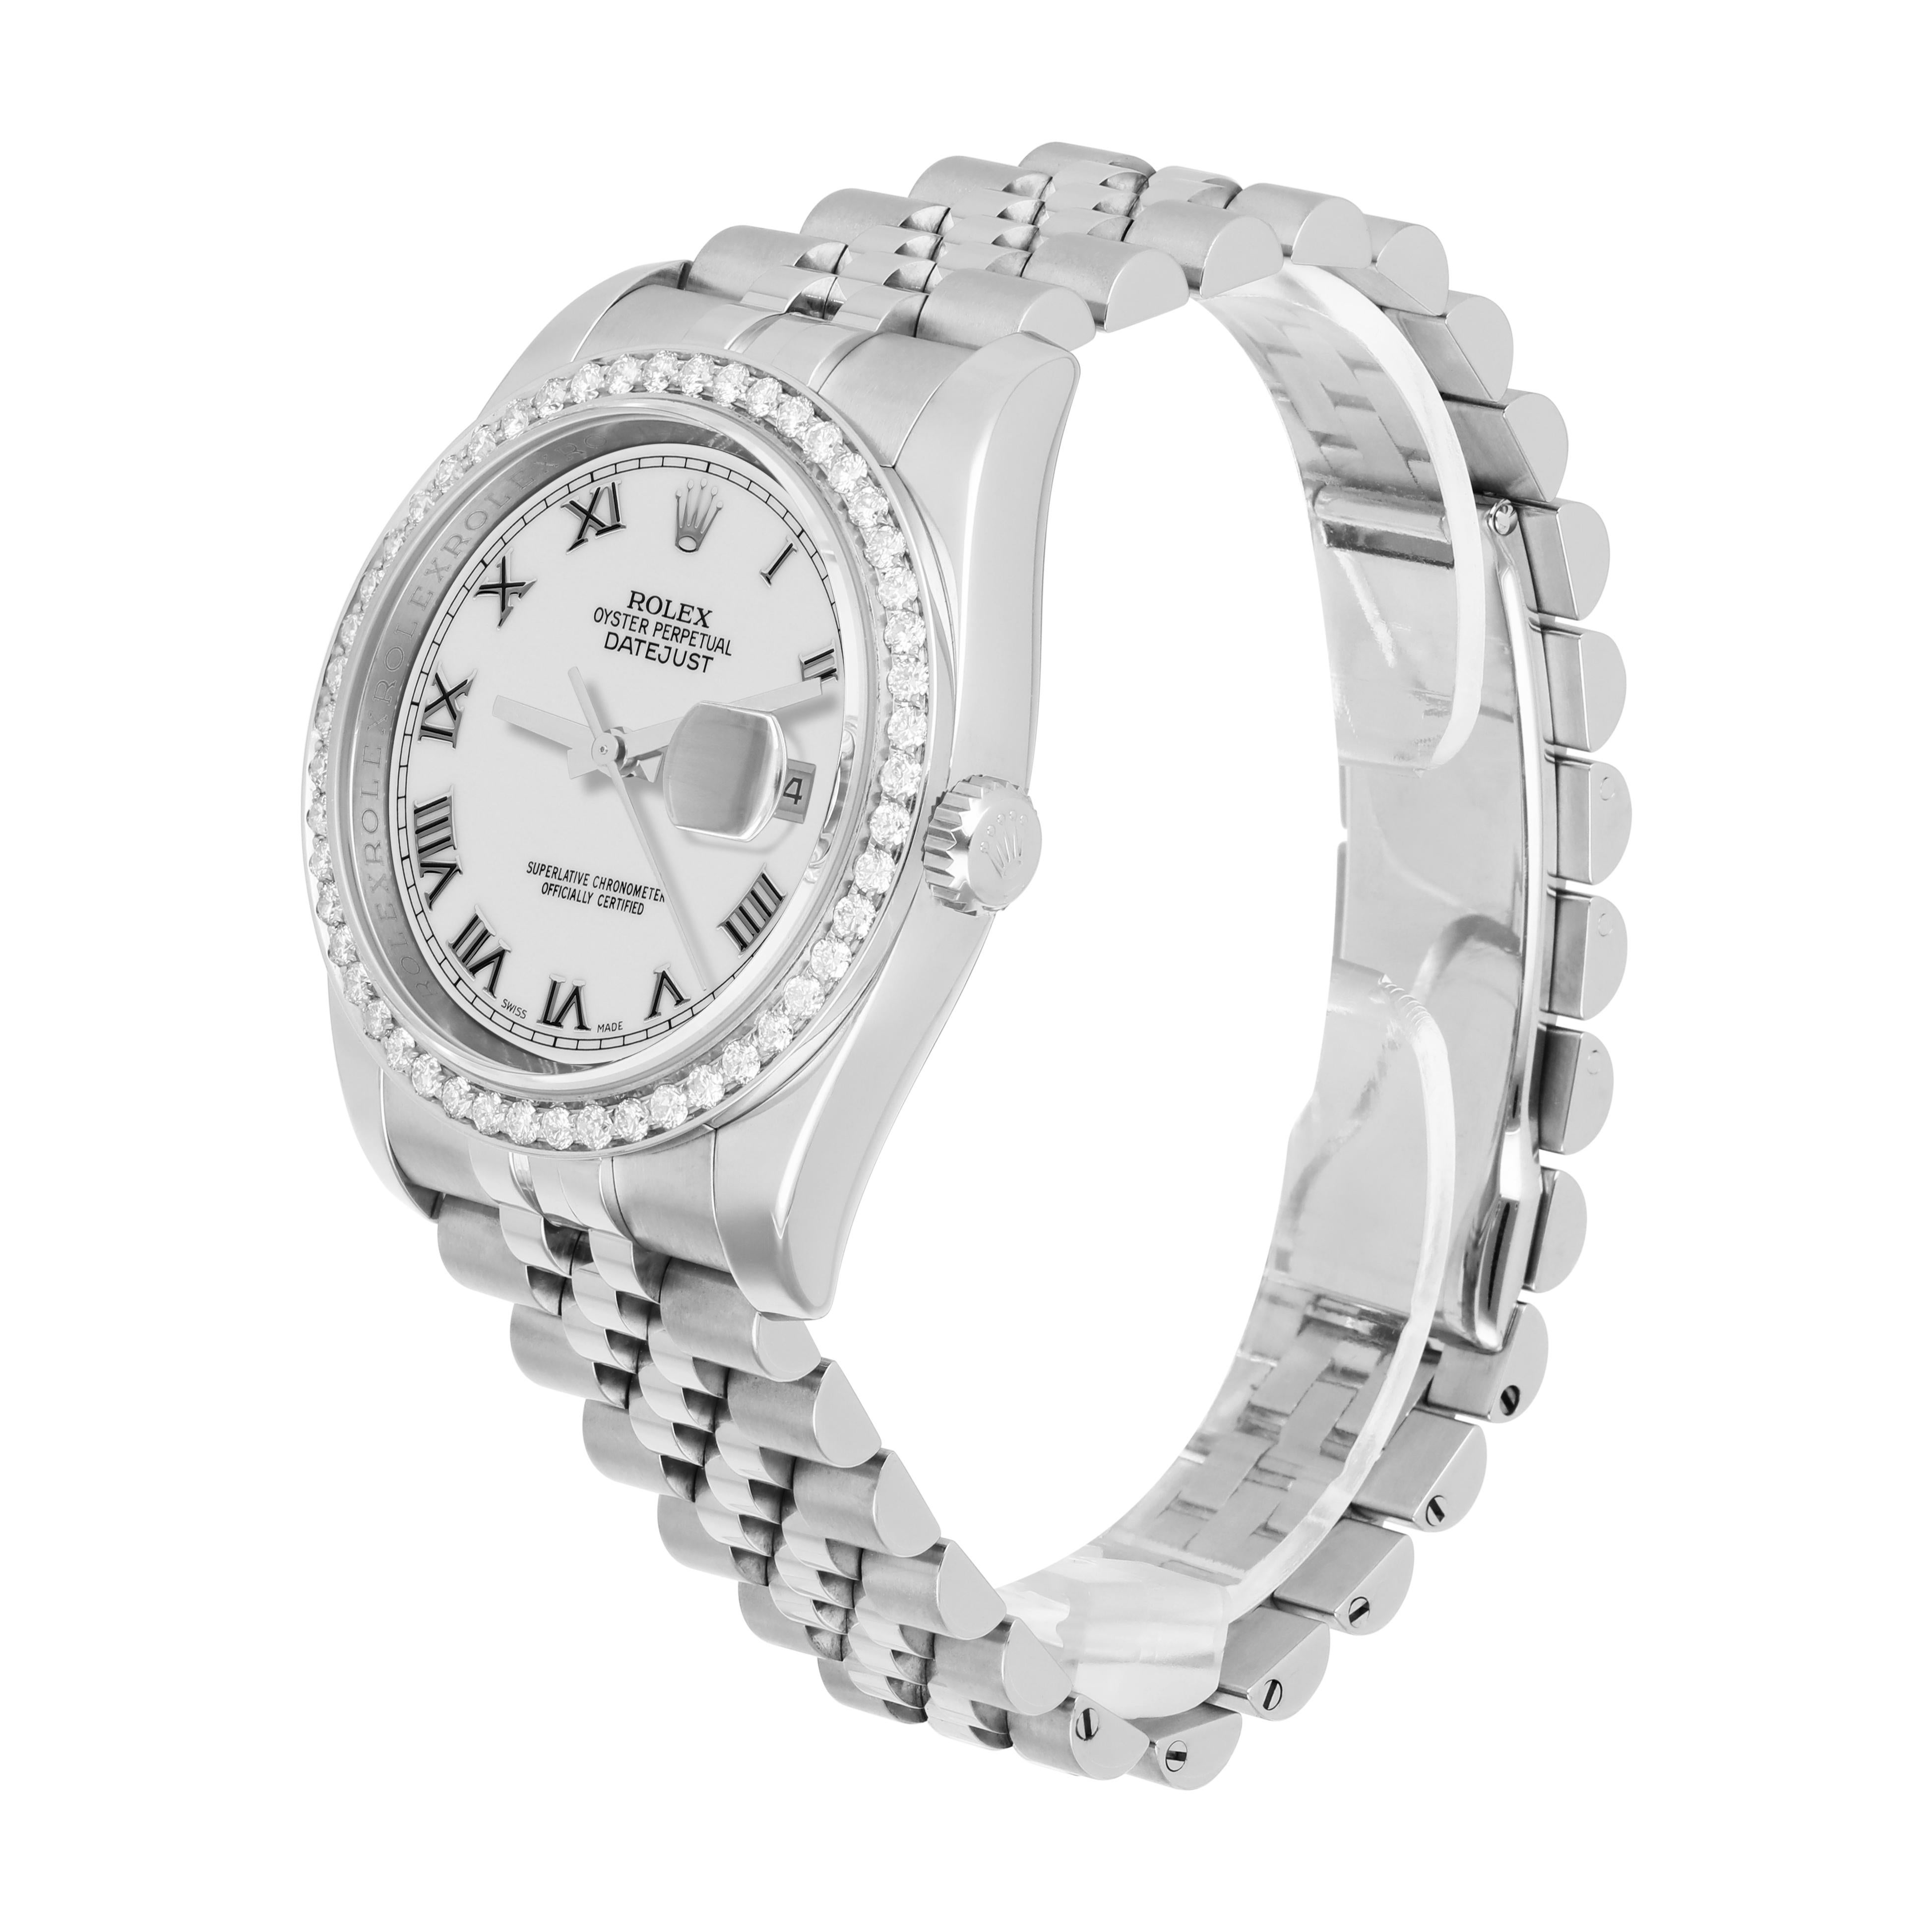 Rolex Datejust 36 116234 Diamond Unisex Watch White Roman Dial Jubilee Band In Excellent Condition For Sale In New York, NY